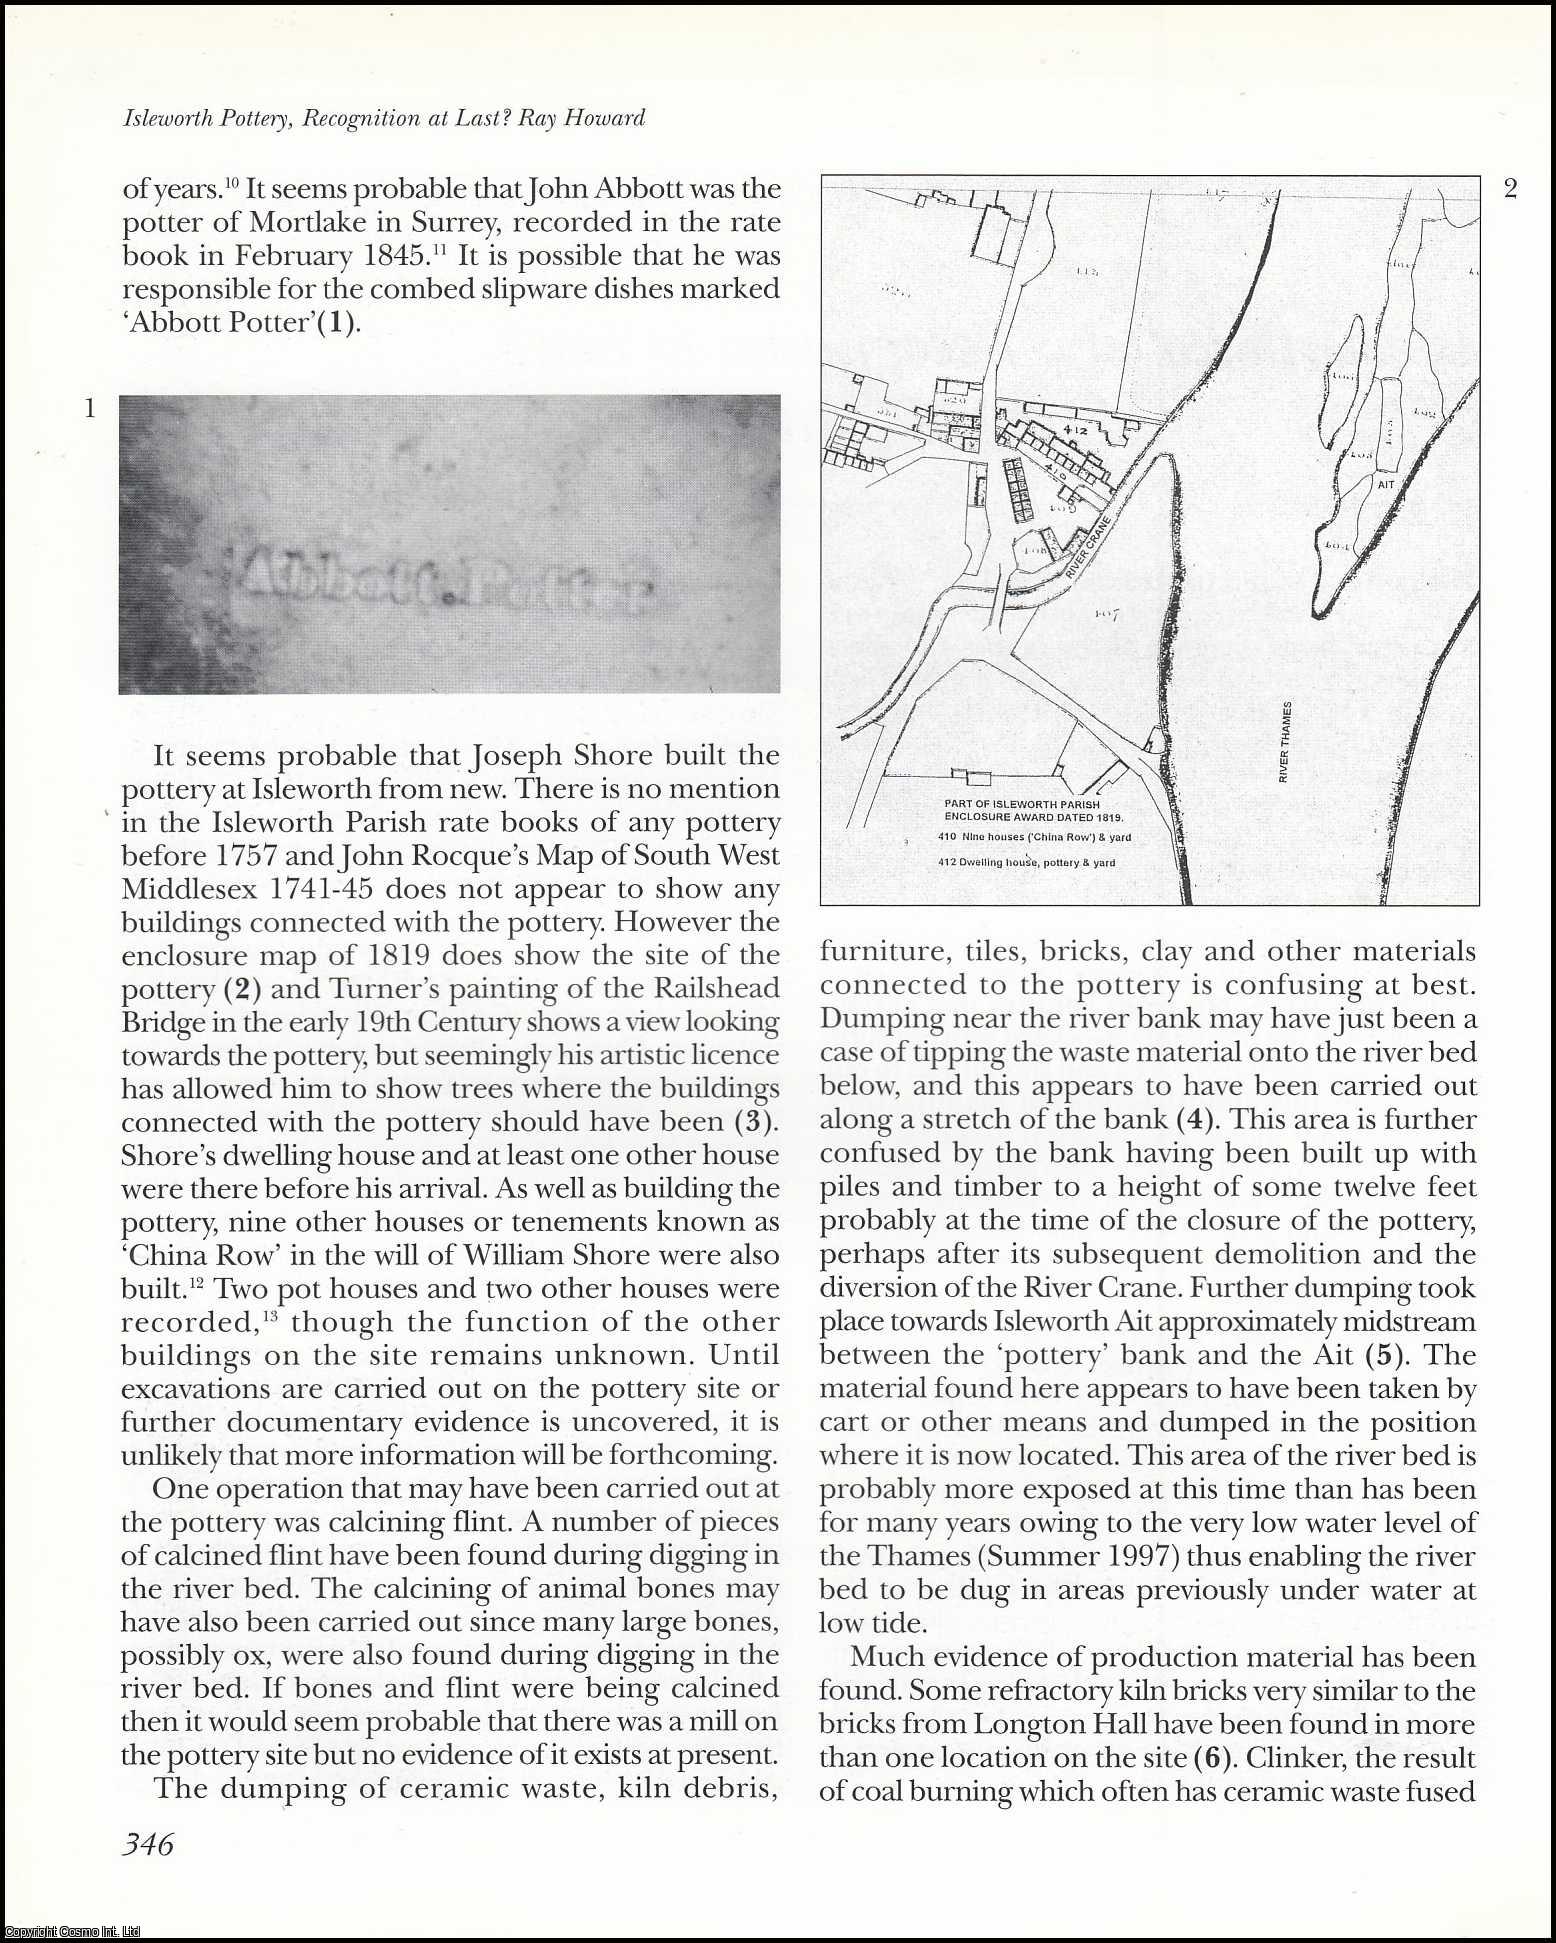 Ray Howard - Isleworth Pottery, Recognition at Last? An original article from the English Ceramic Circle, 1998.